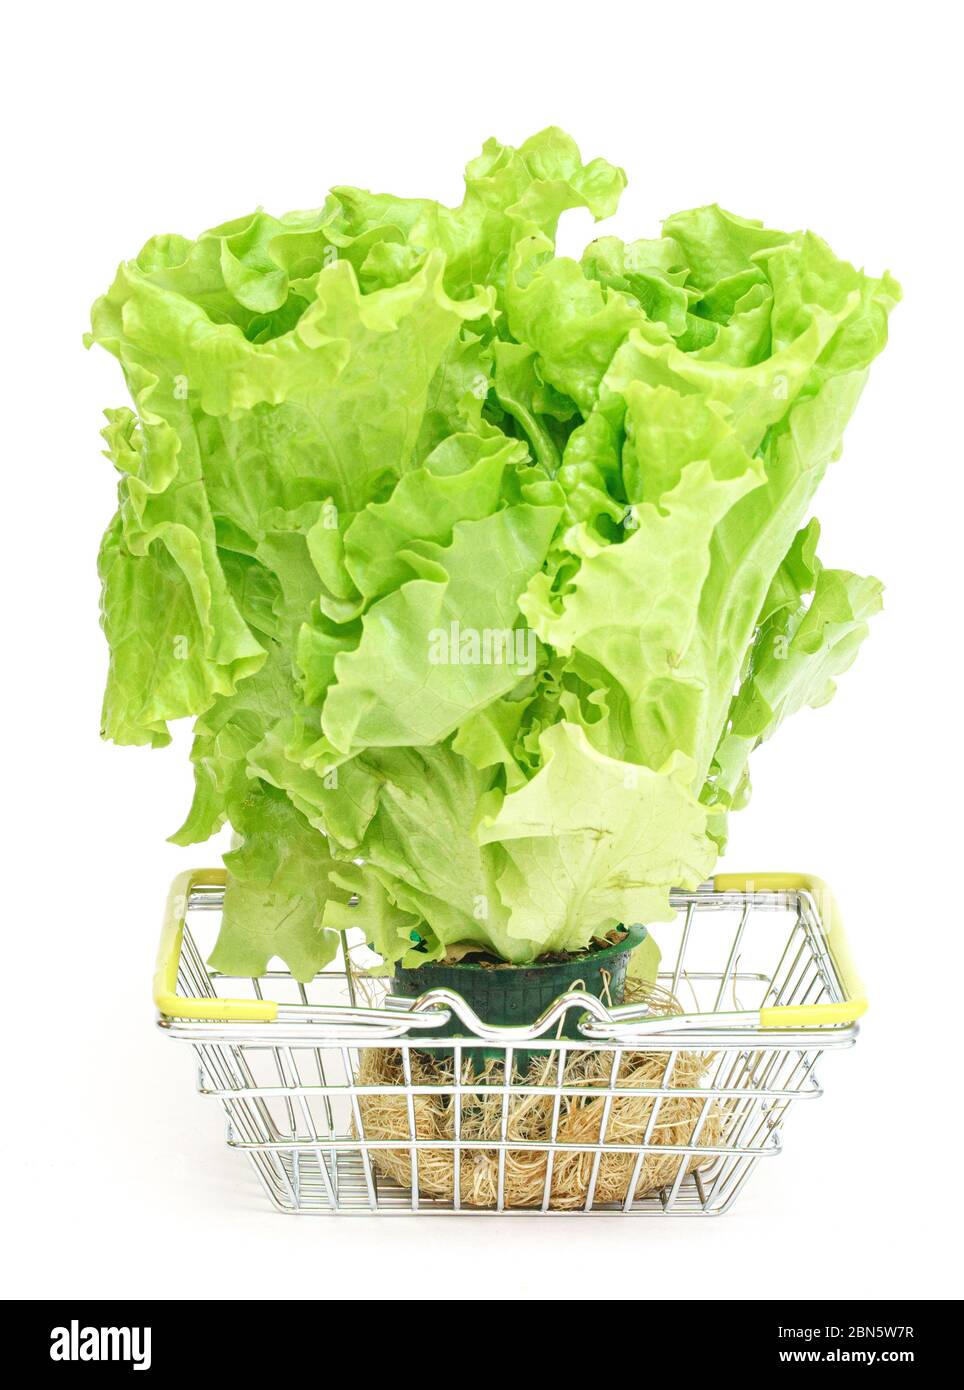 Fresh green salad in a small metal shopping basket on a white background. Food, shopping at the store, supermarkets, farm. Stock Photo